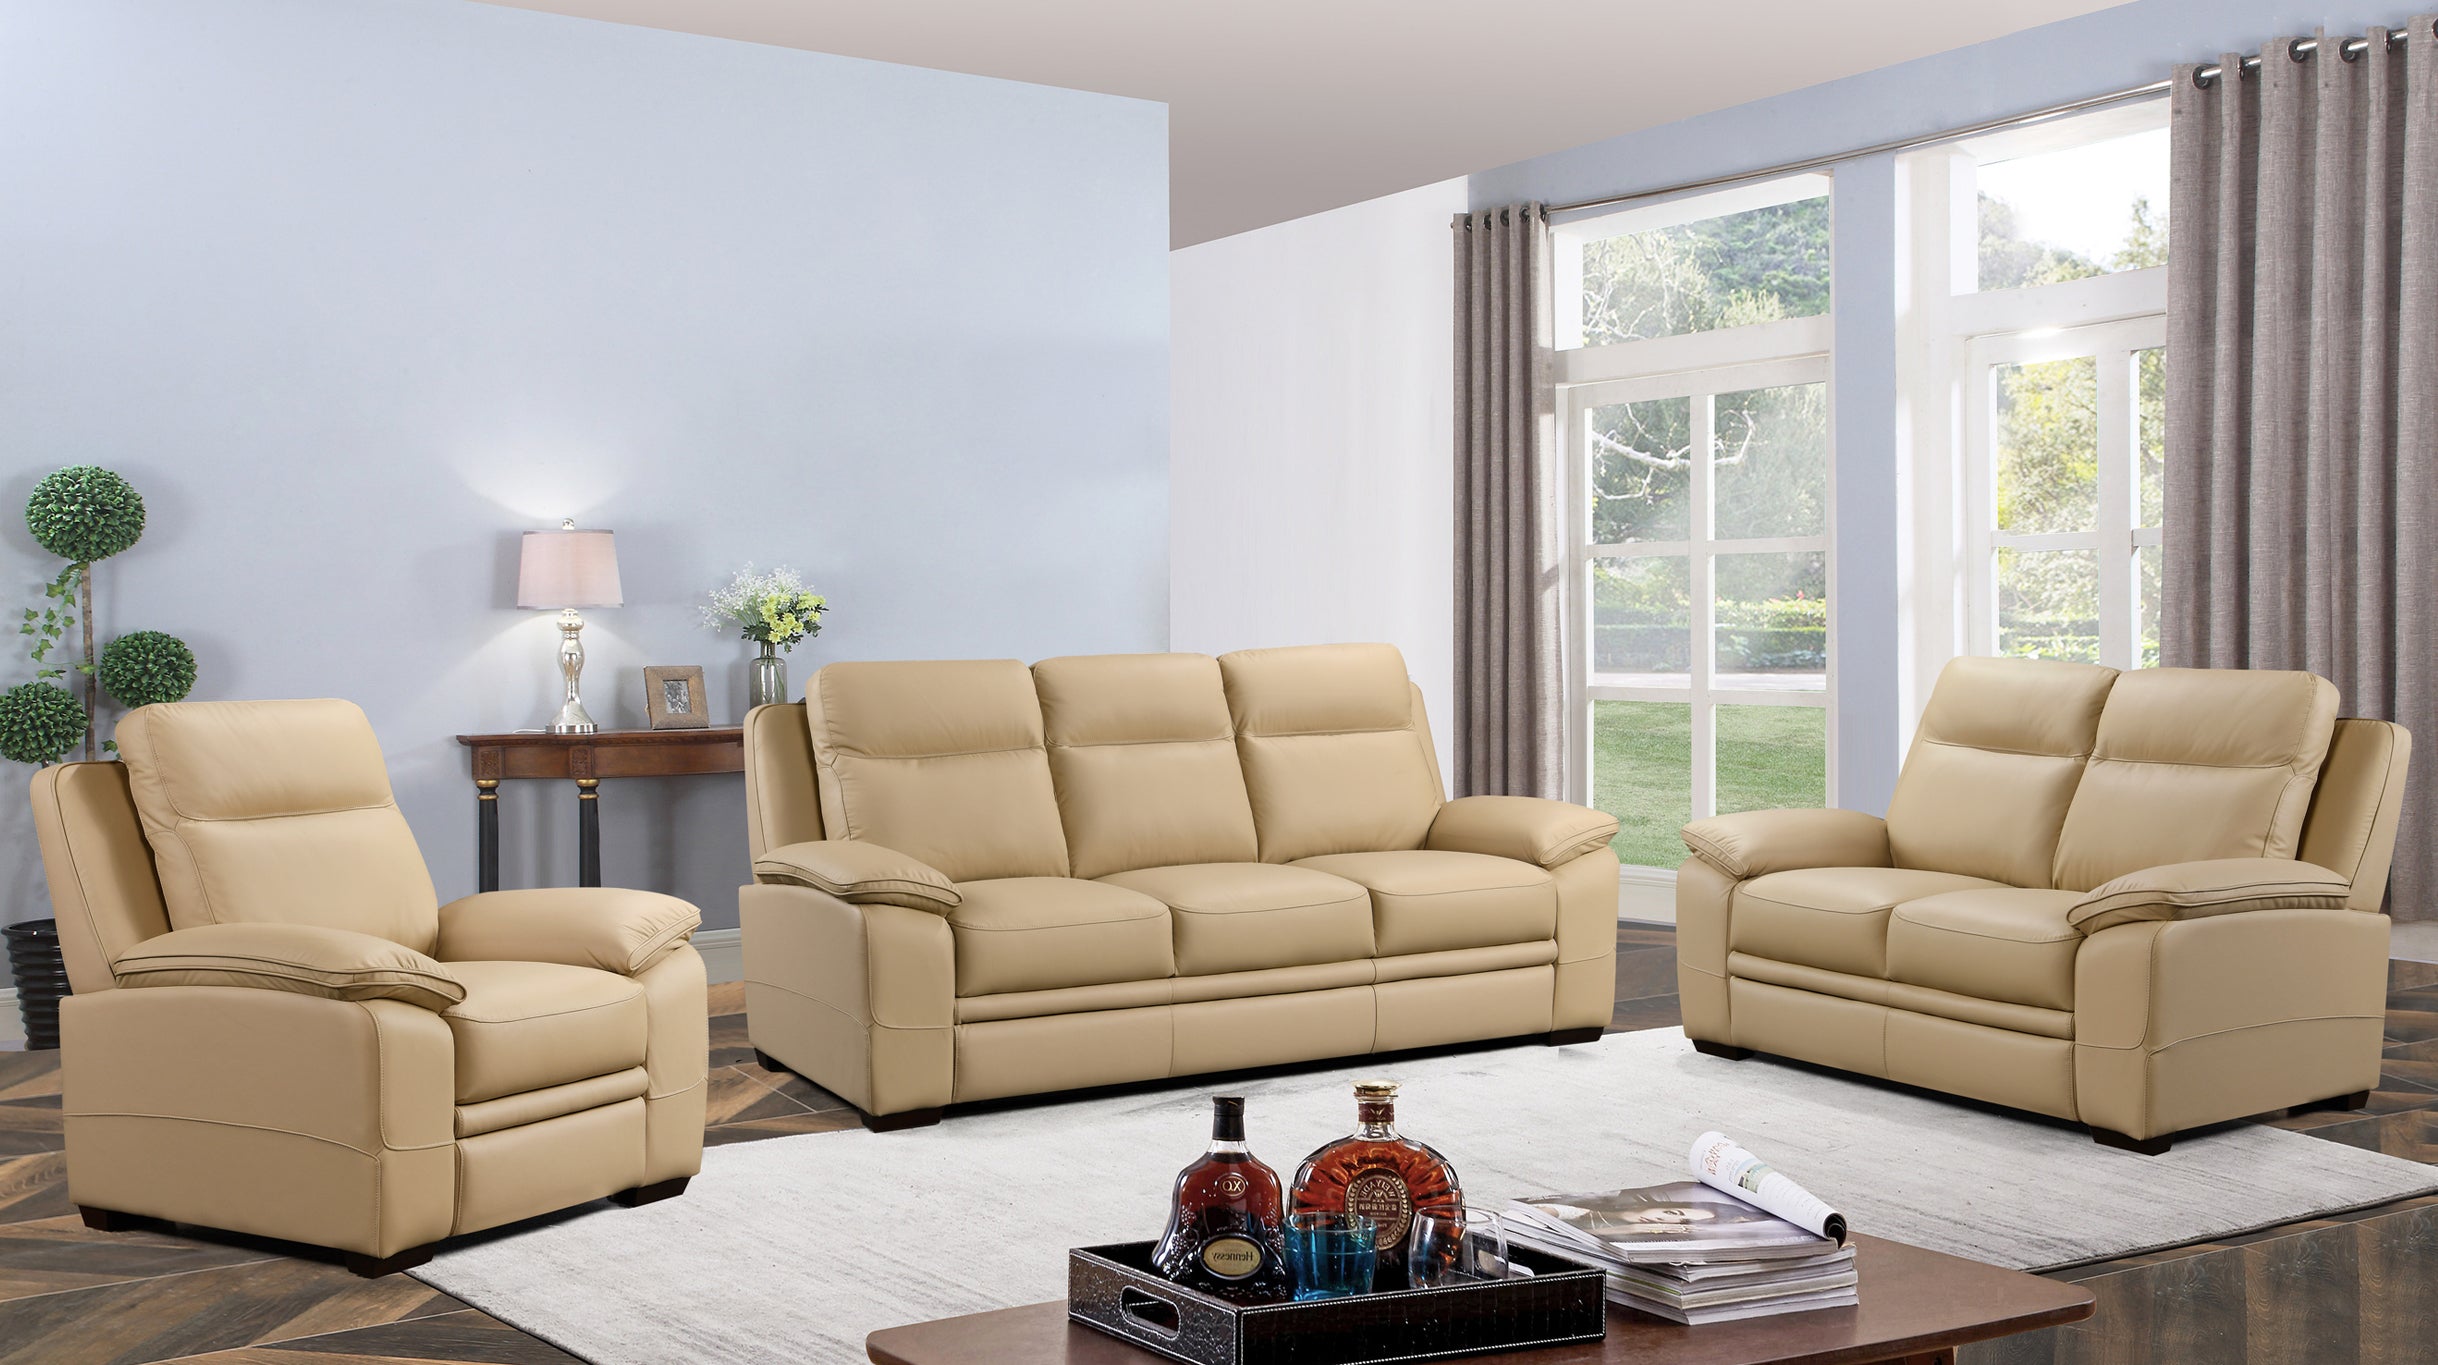 Mont Blanc Leather 2 Seater Sofa